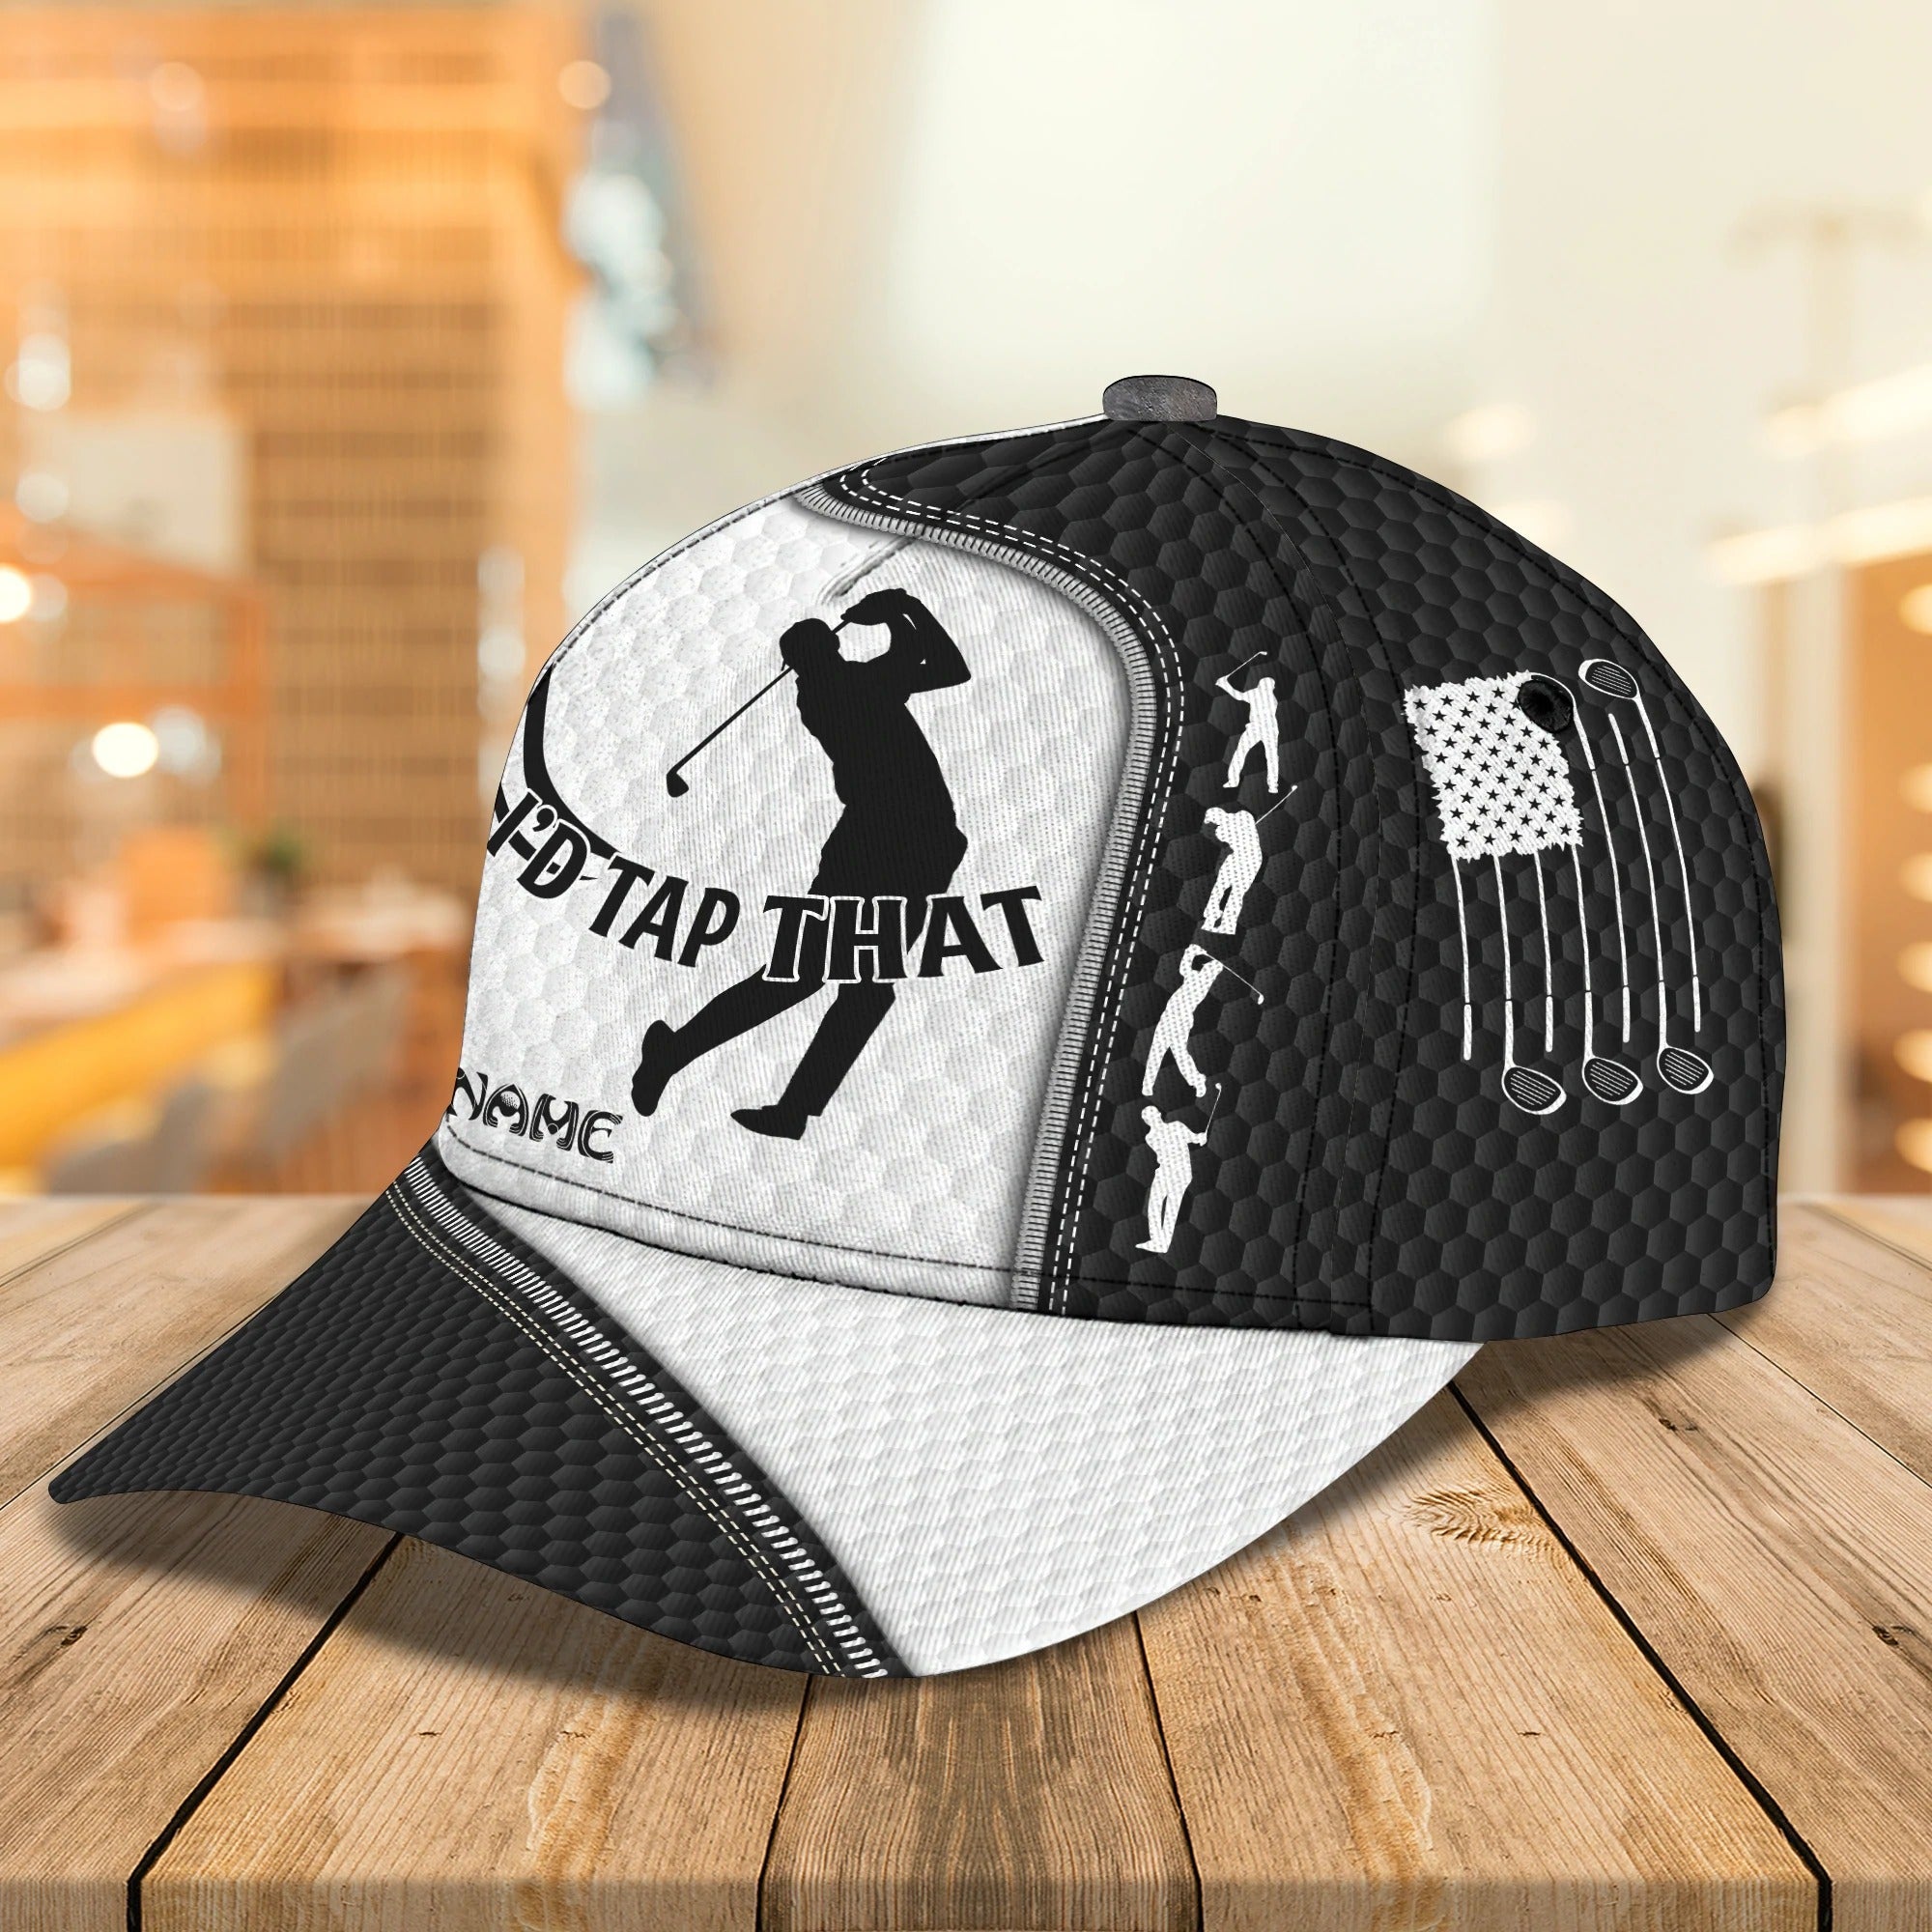 Golfer Dad’s Personalized Full 3D Printed Cap: A Father’s Day Gift for the Golf Enthusiast – GP026